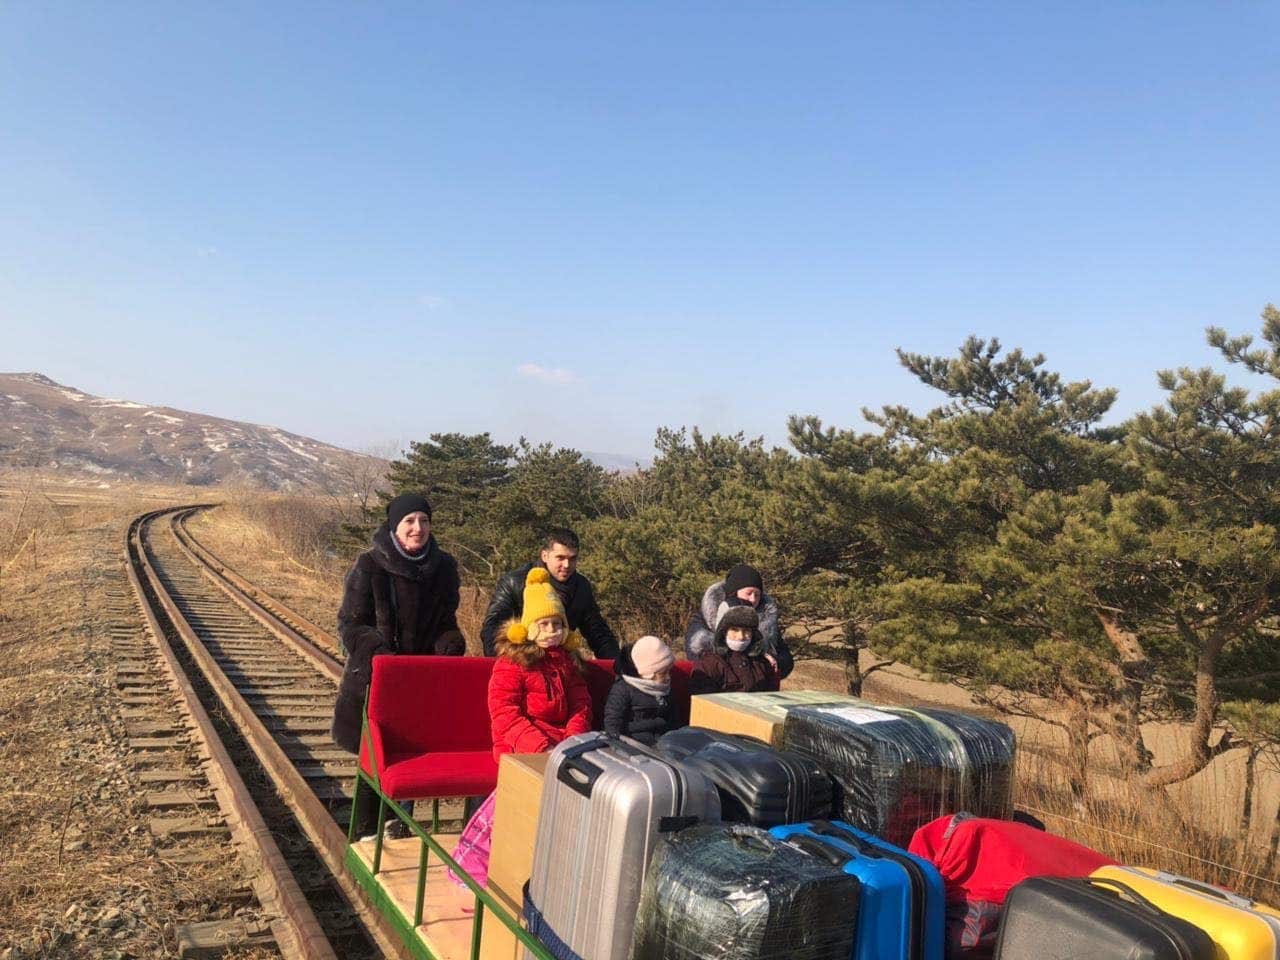 Russian diplomats leave North Korea with hand-held trolley